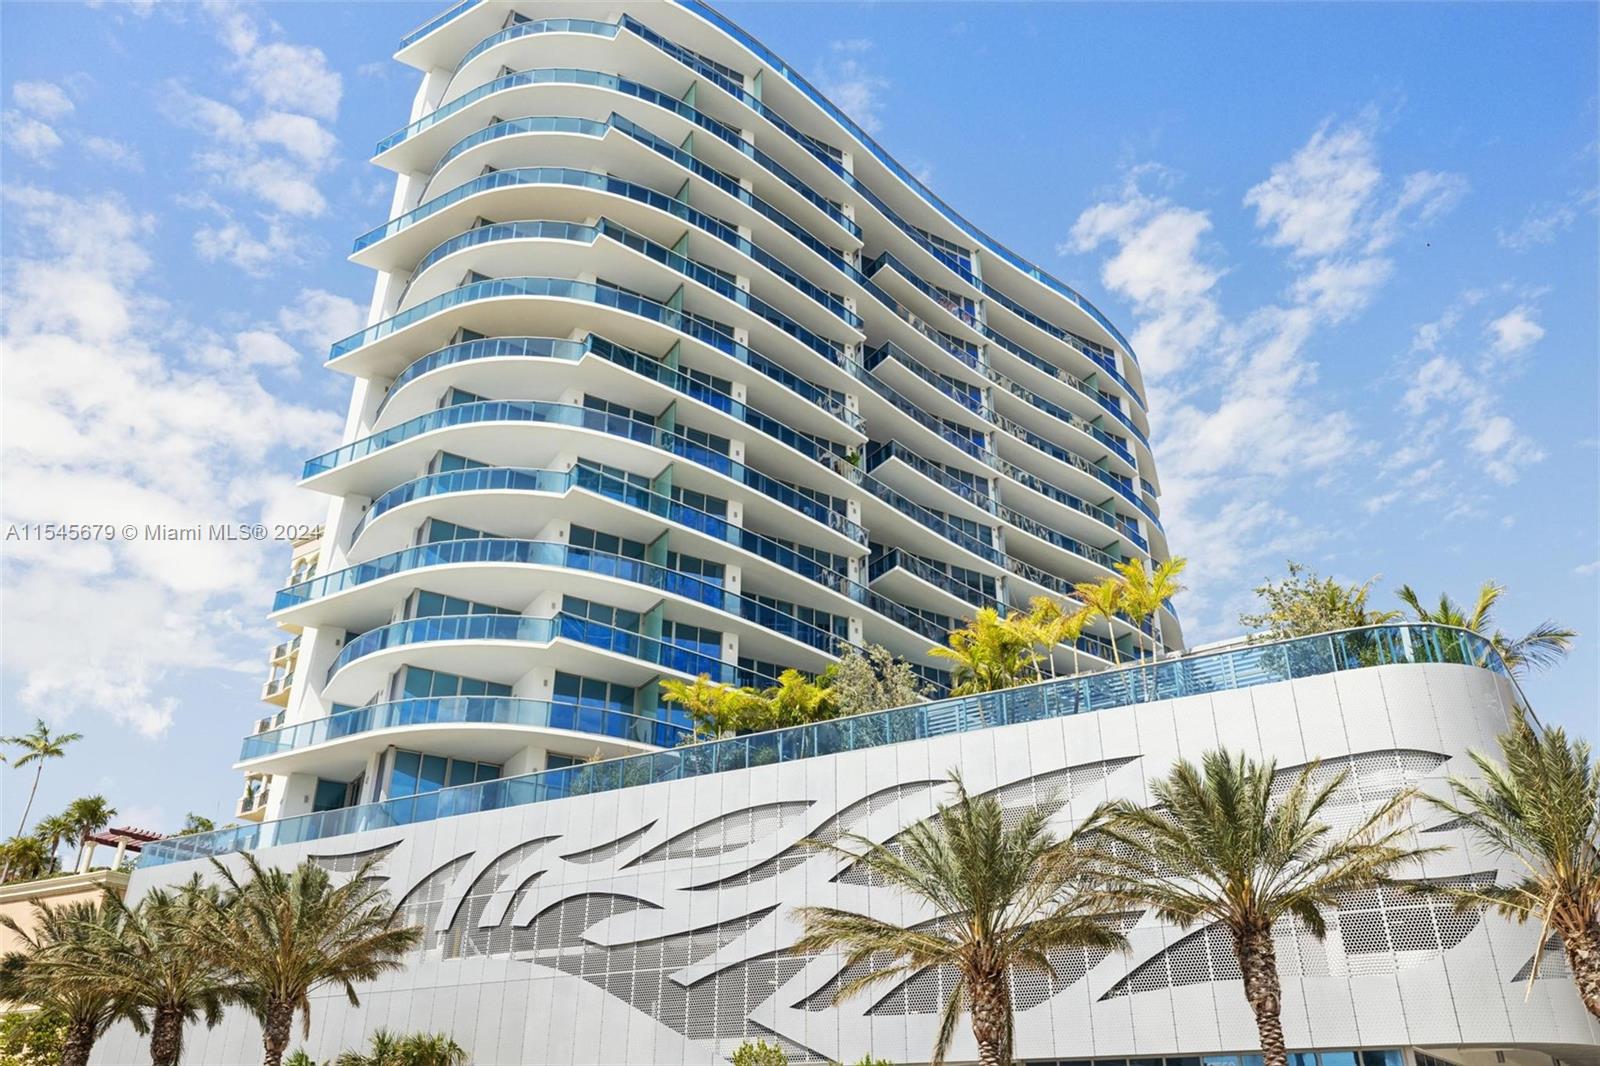 Experience luxury living in the heart of Sunny Isles at this brand new 2-bed, 2.5-bath unit. Enjoy panoramic ocean views from floor-to-ceiling windows and a private balcony. Featuring 10’ ceilings and Steven G. Interiors finishes. This fully furnished apartment offers elegance and comfort. With custom-made porcelain floors throughout, and 1,587 SF of total area, indulge in relaxation and rejuvenation. Enjoy lush landscaping by Nielsen Landscape Architects and world-class facilities for a harmonious lifestyle. Amenities include a pool deck, yoga garden, fitness center, kids’ playroom, concierge services, and more. Prime location in one of the world’s most sought-after destinations, defined by its alluring coastlines and vibrant atmosphere. Close to Aventura Mall and Bal Harbour.